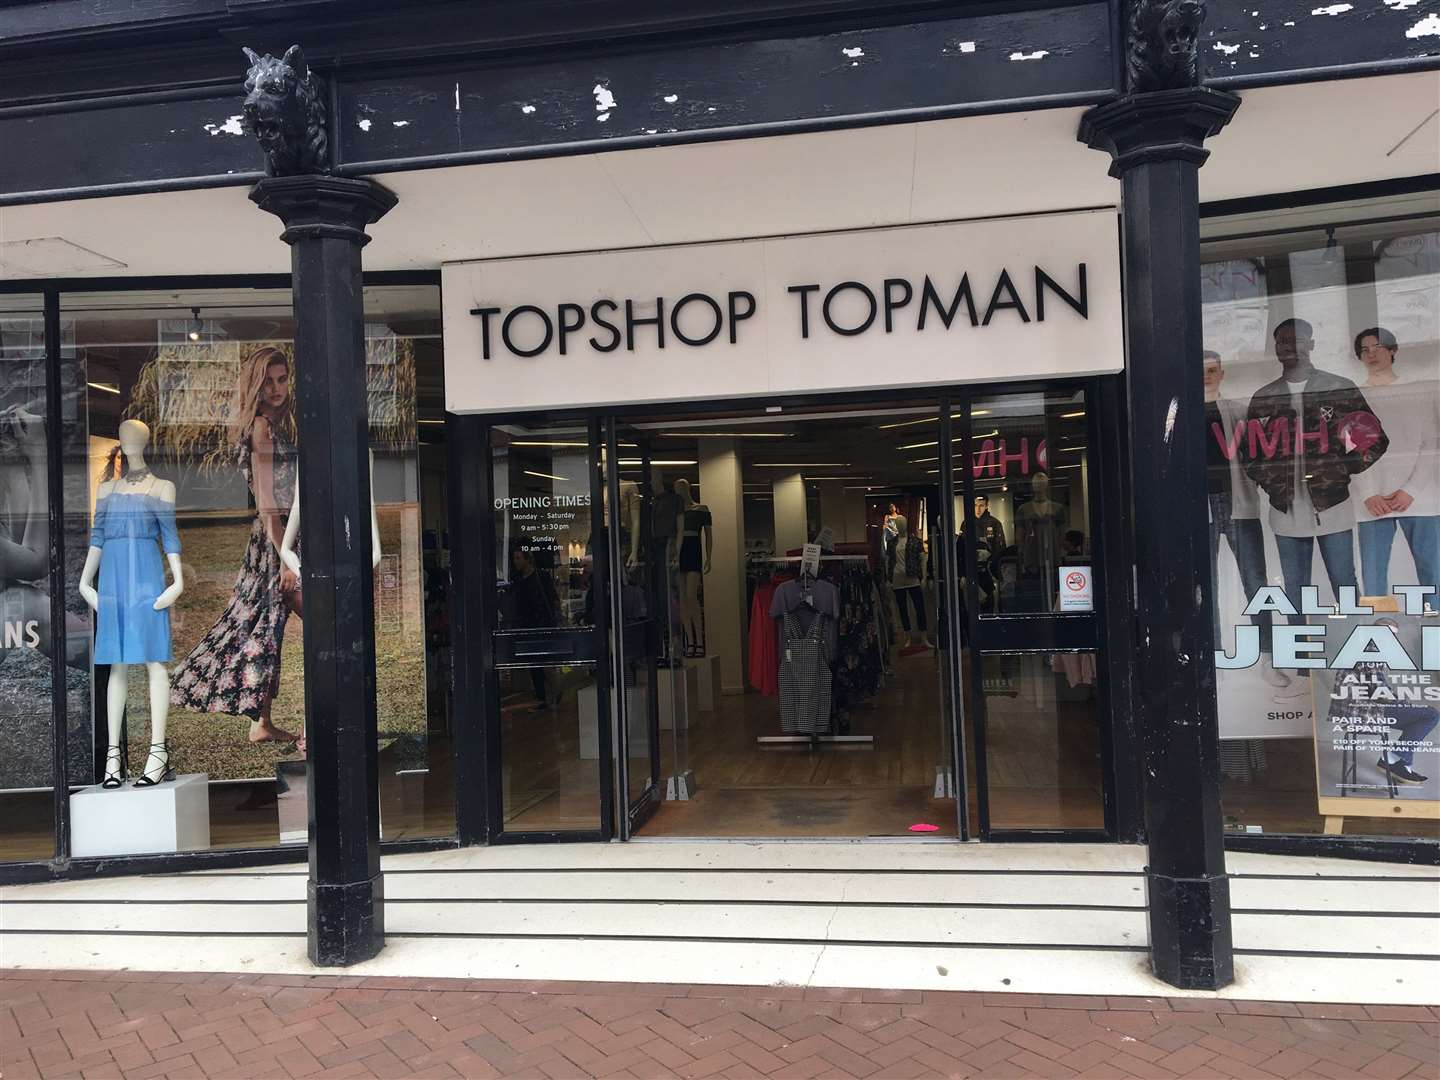 The challenge to the CVA for Topshop Topman comes from a US property group